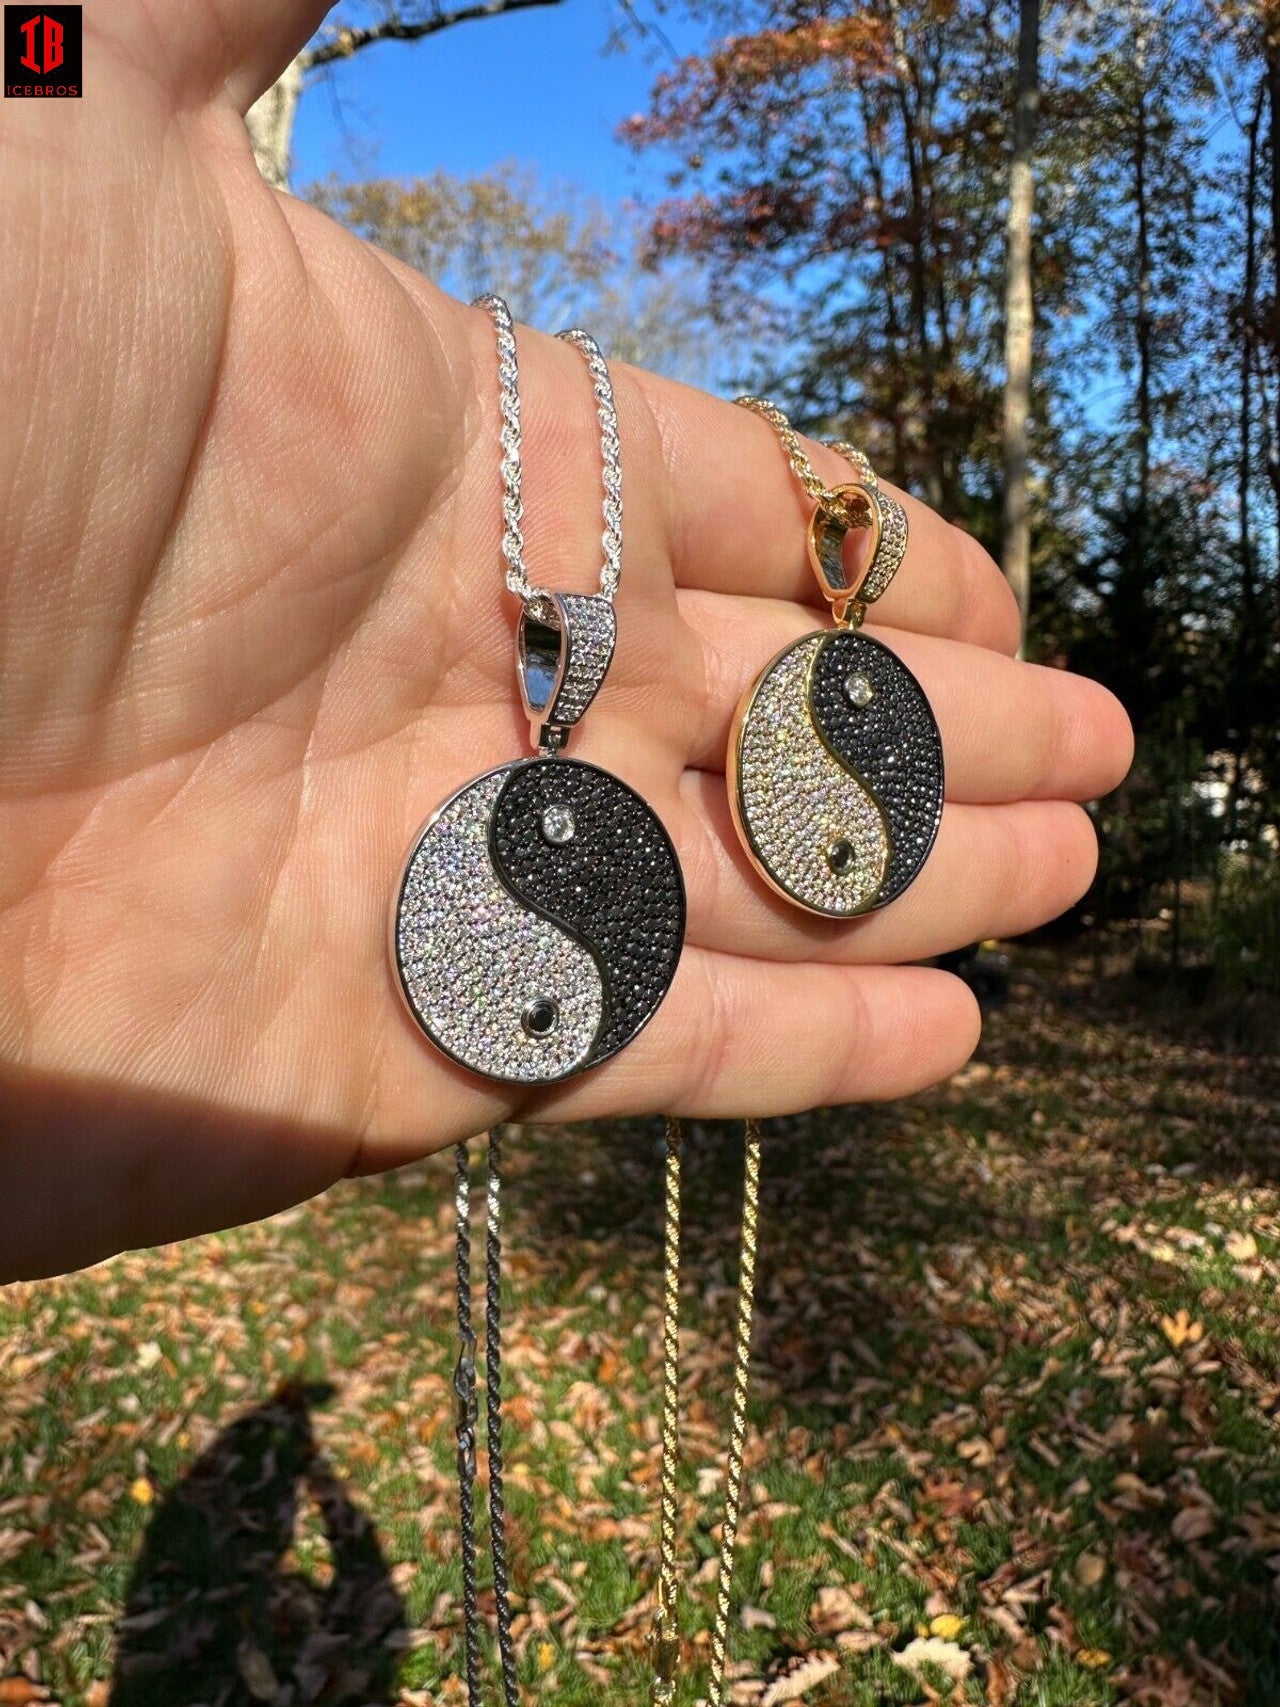 Men Showing 14k White Gold and 14k Yellow Gold Ying Yang Moissanite Pendant Necklace With Rope Chain On Hand 